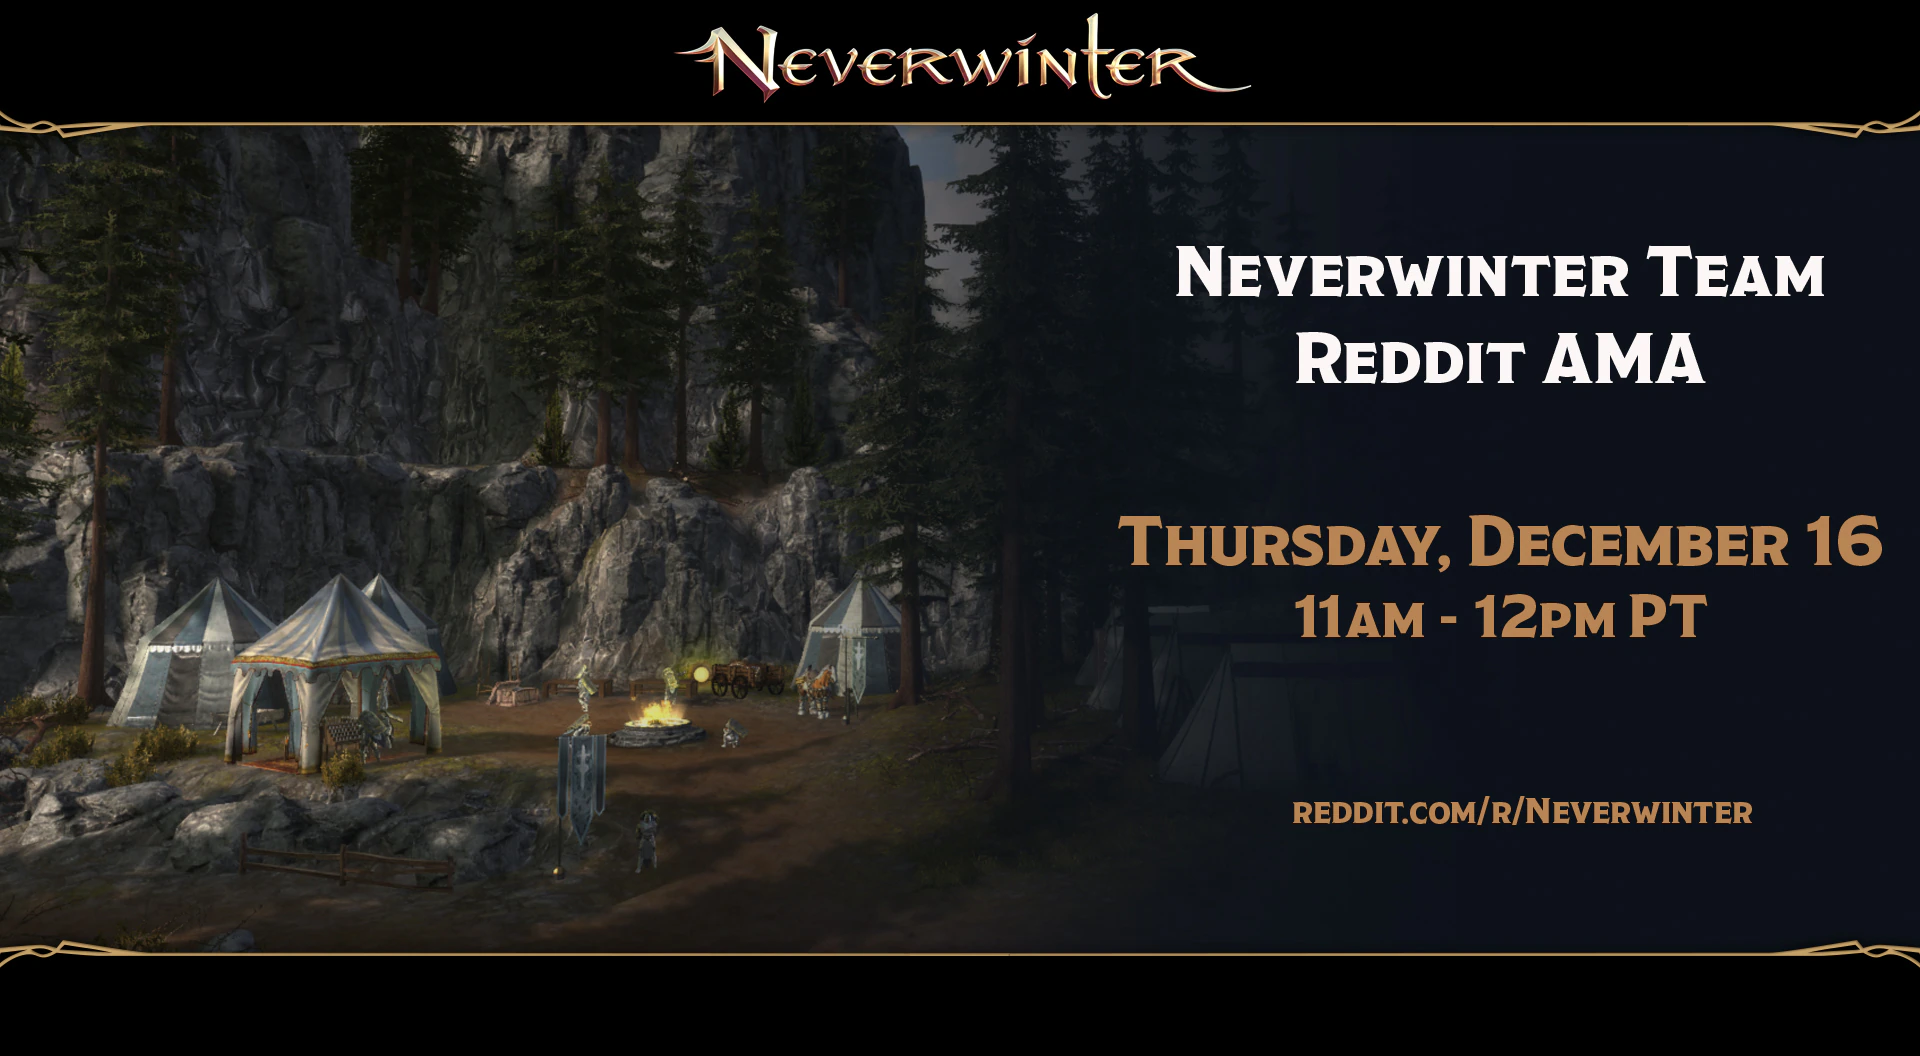 The Neverwinter Team is Hosting a Reddit AMA on December 16th